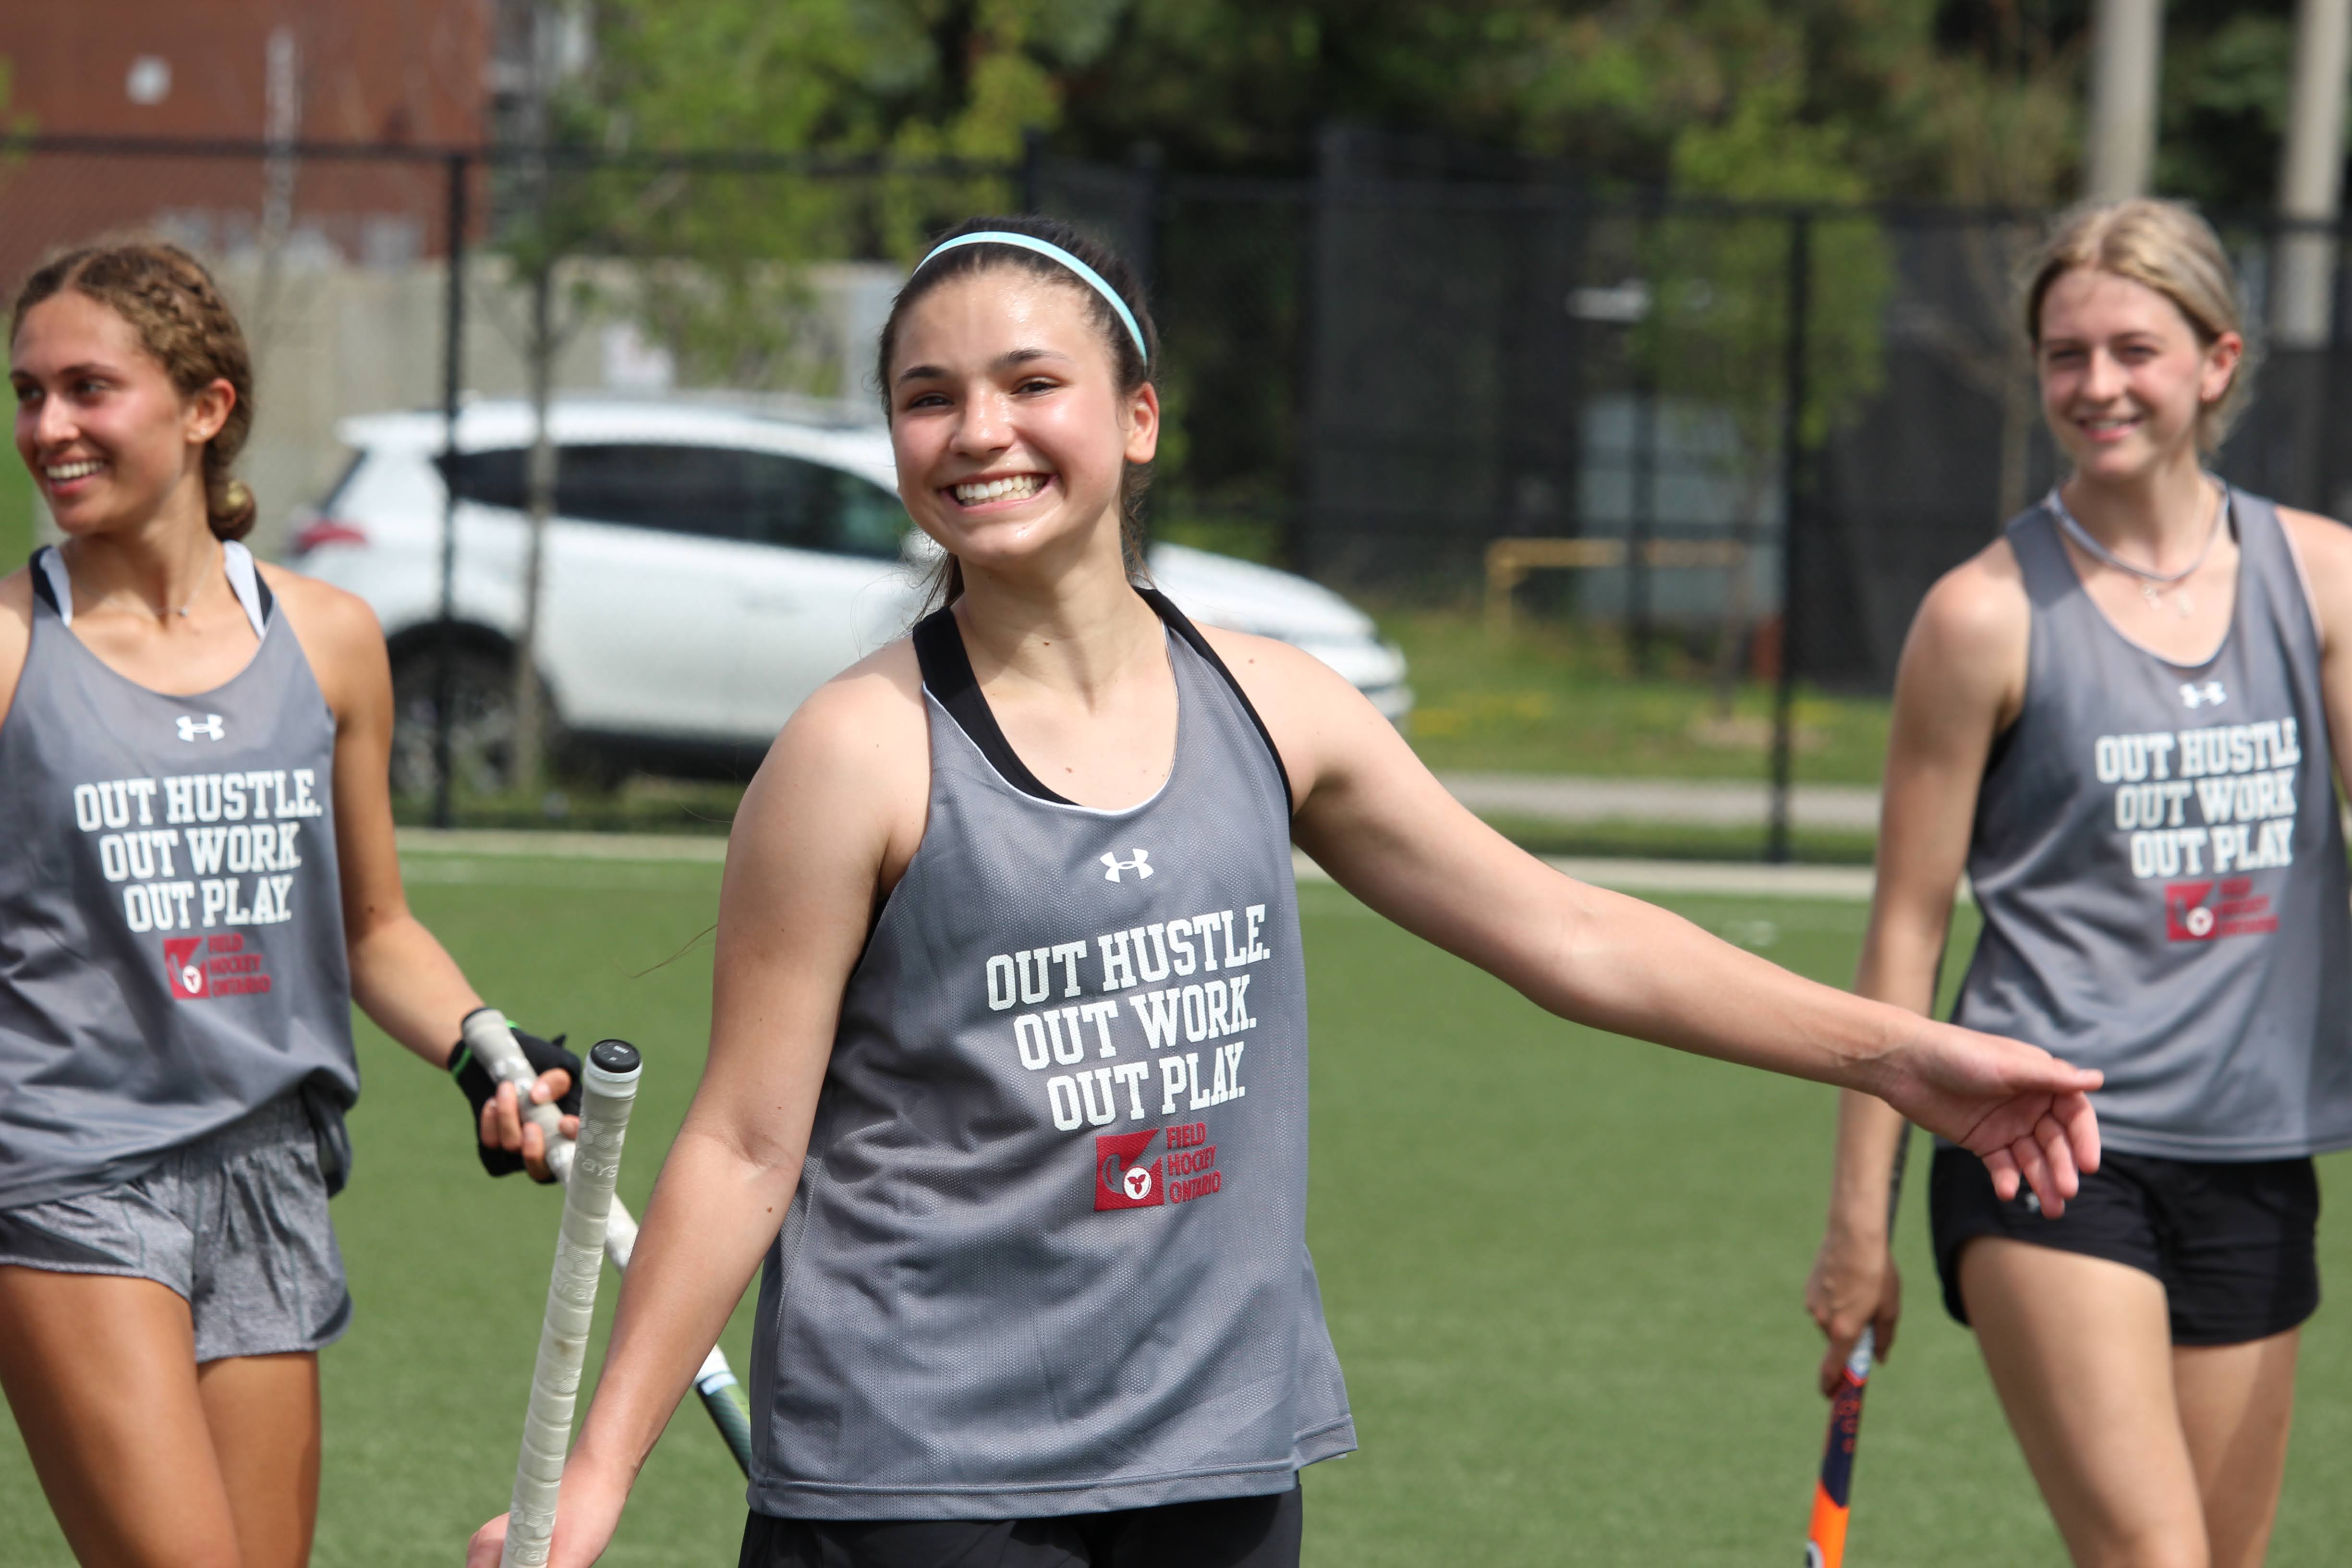 Field hockey players smiling on the field